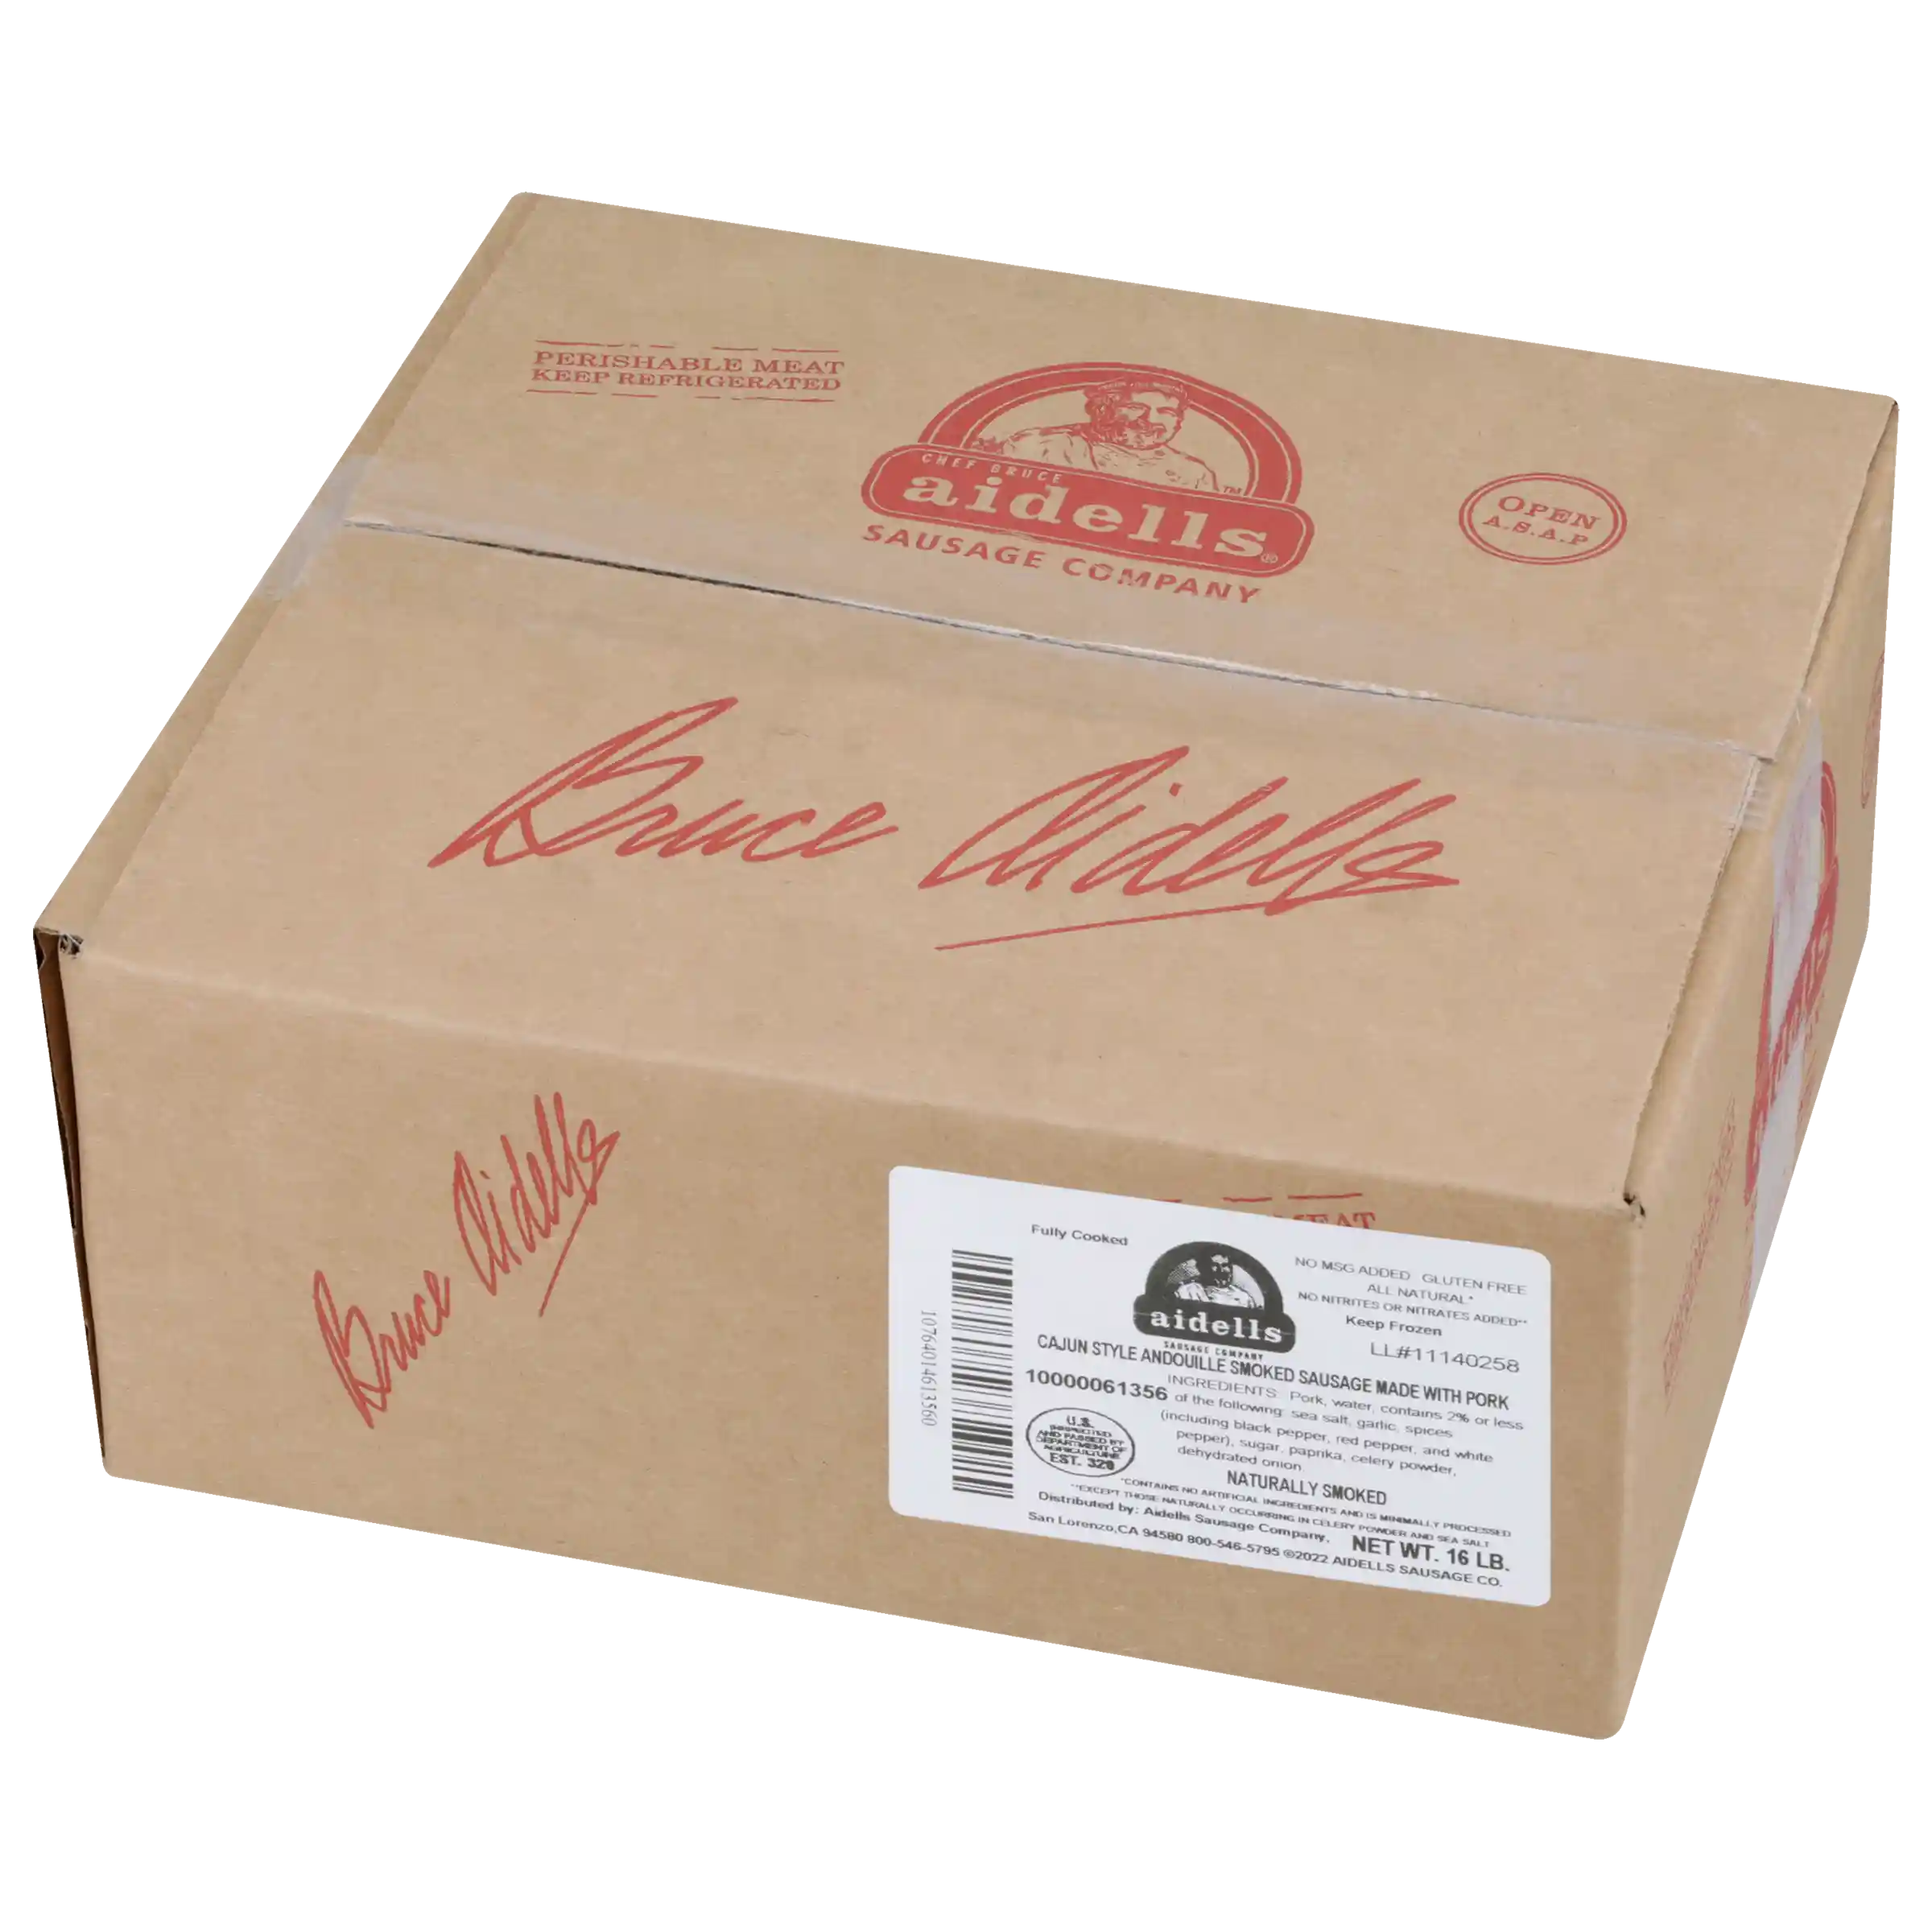 Aidells® Fully Cooked Smoked Cajun-Style Andouille Pork Sausage, 2 oz, 128 Links per Case, 16 Lbs, Frozen_image_41